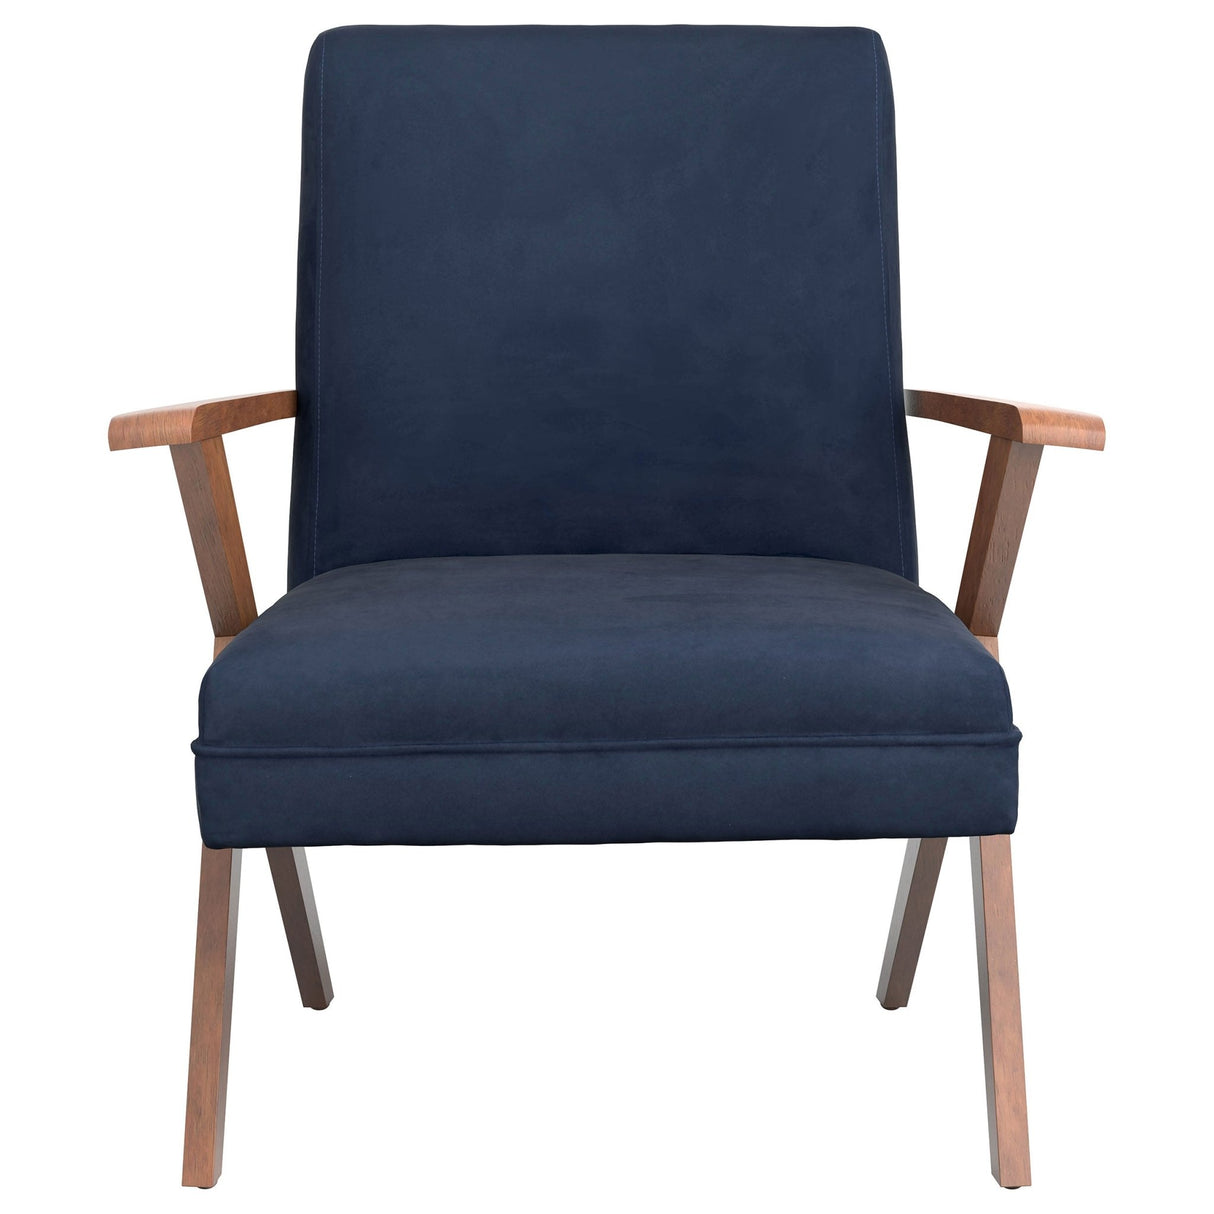 Accent Chair - Cheryl Wooden Arms Accent Chair Dark Blue and Walnut - Accent Chairs - 905415 - image - 3